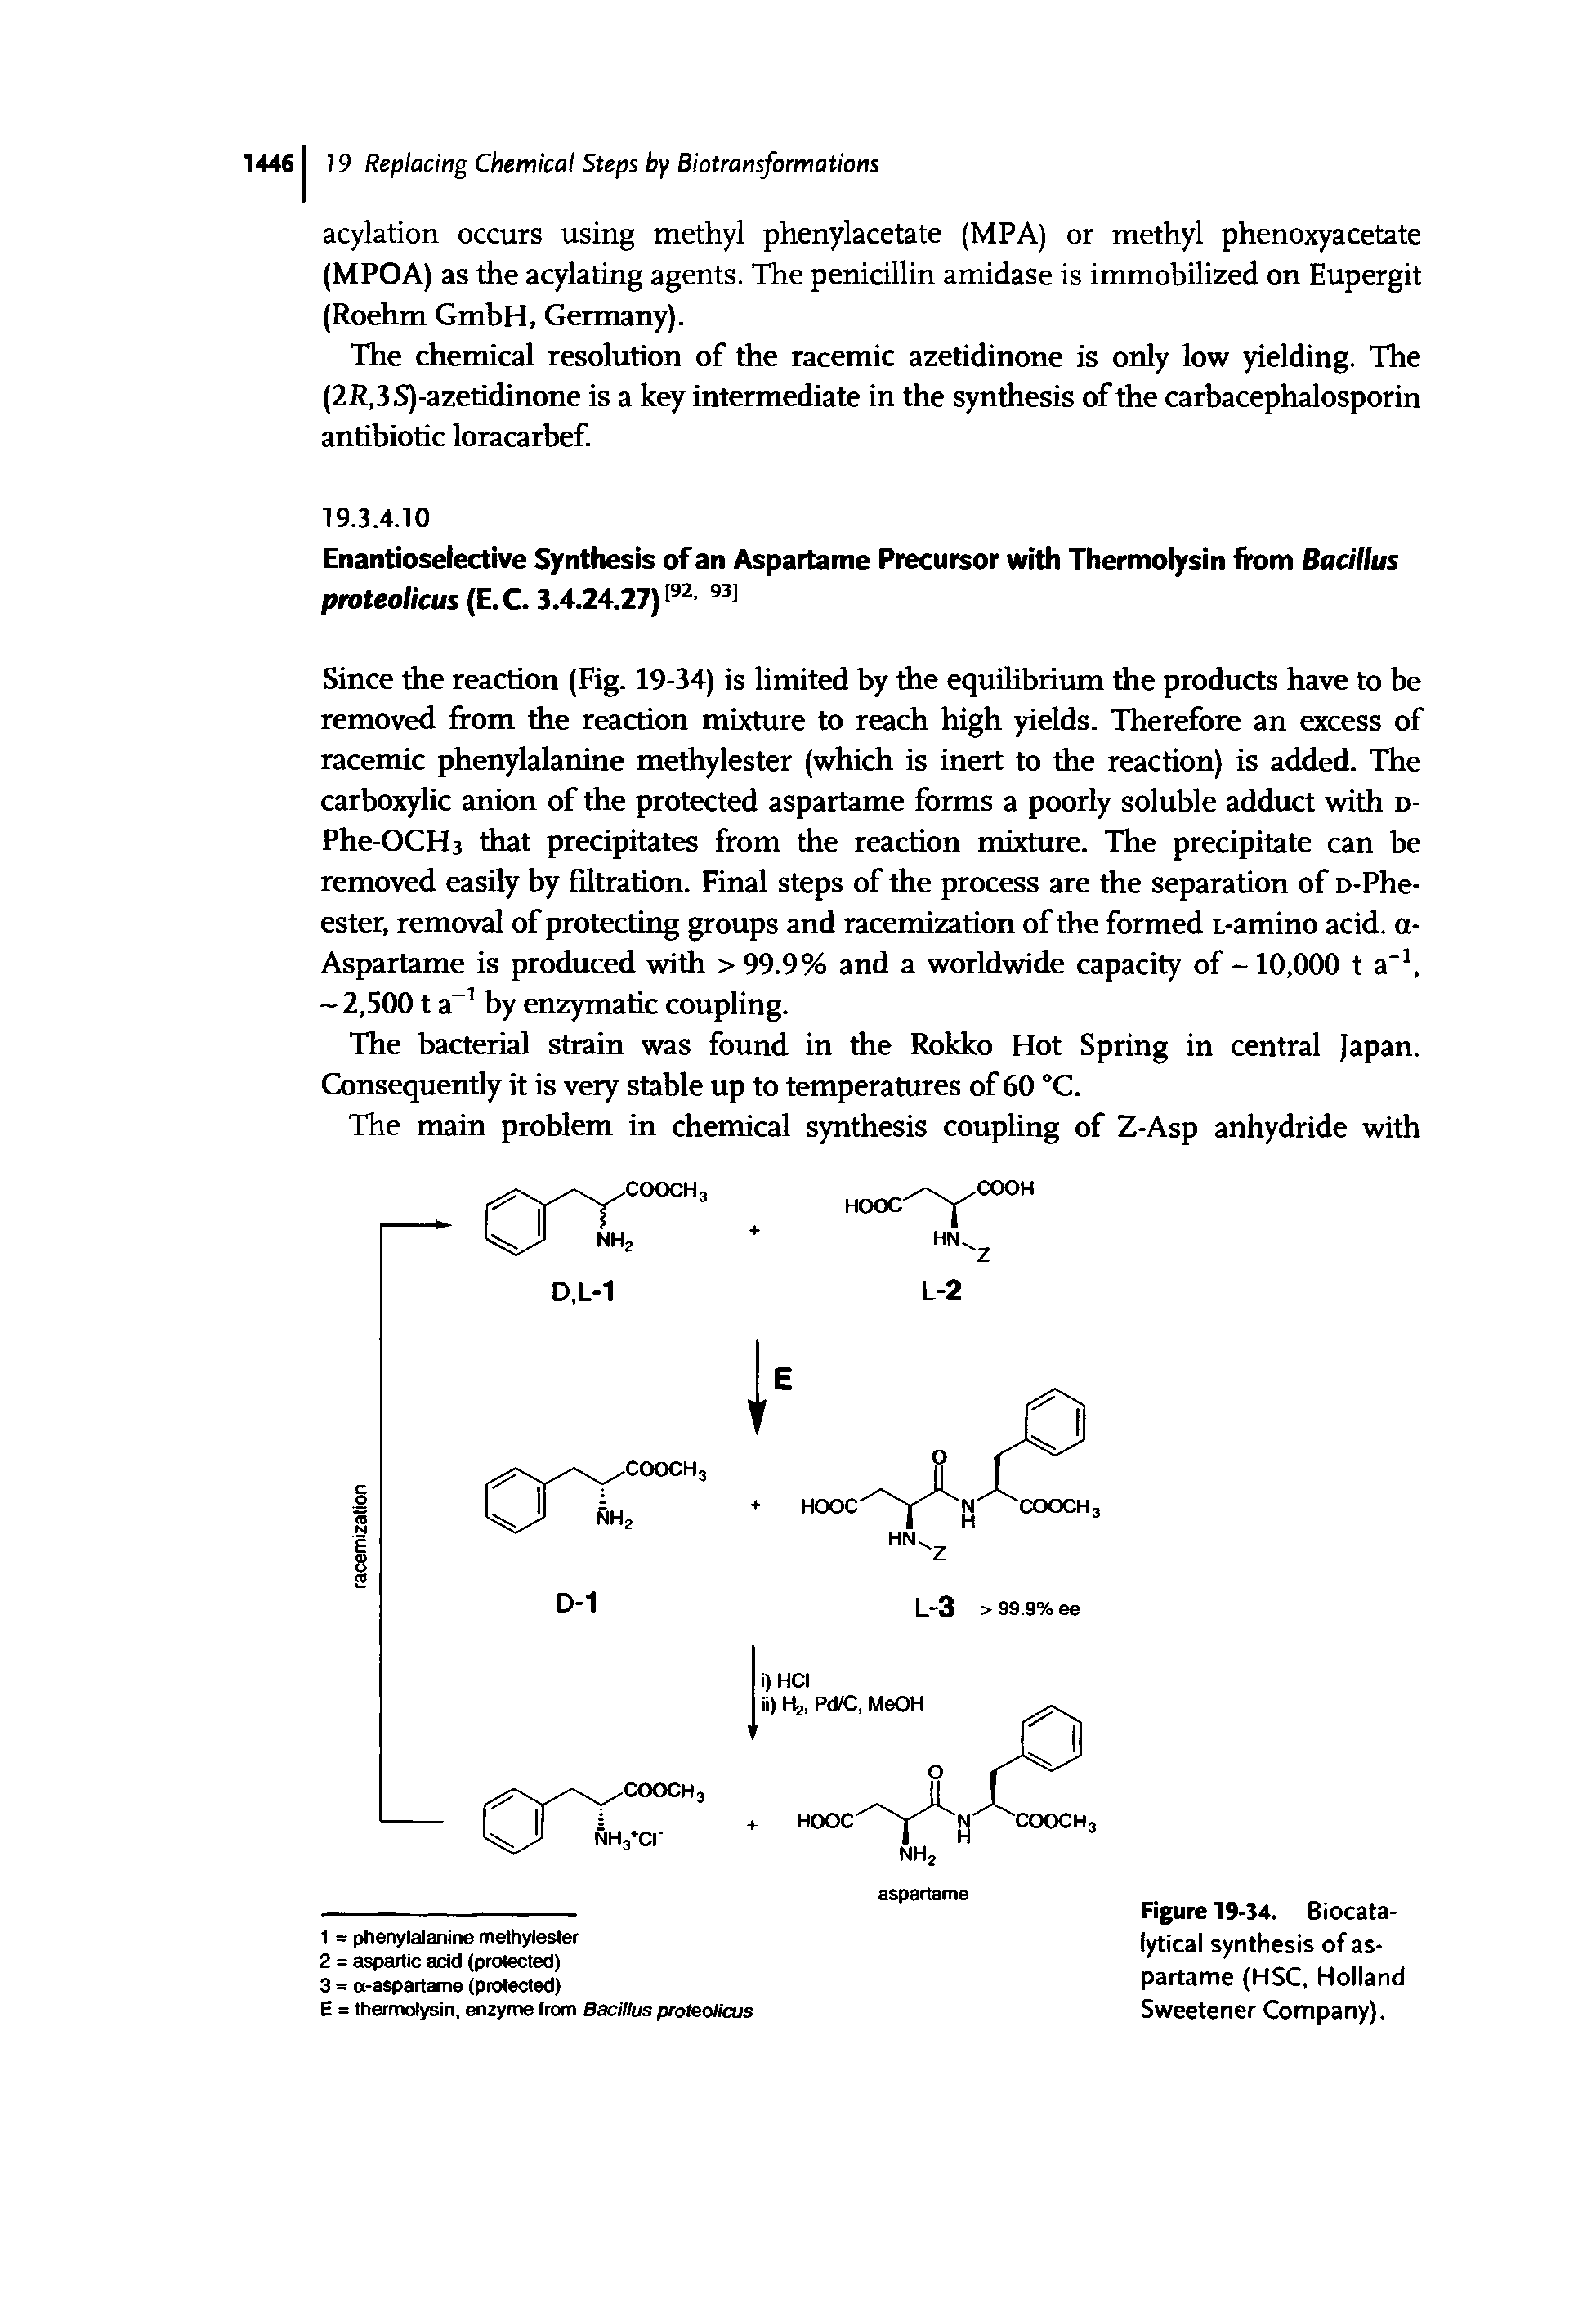 Figure 19-34. Biocata-lytical synthesis of aspartame (HSC, Holland Sweetener Company).